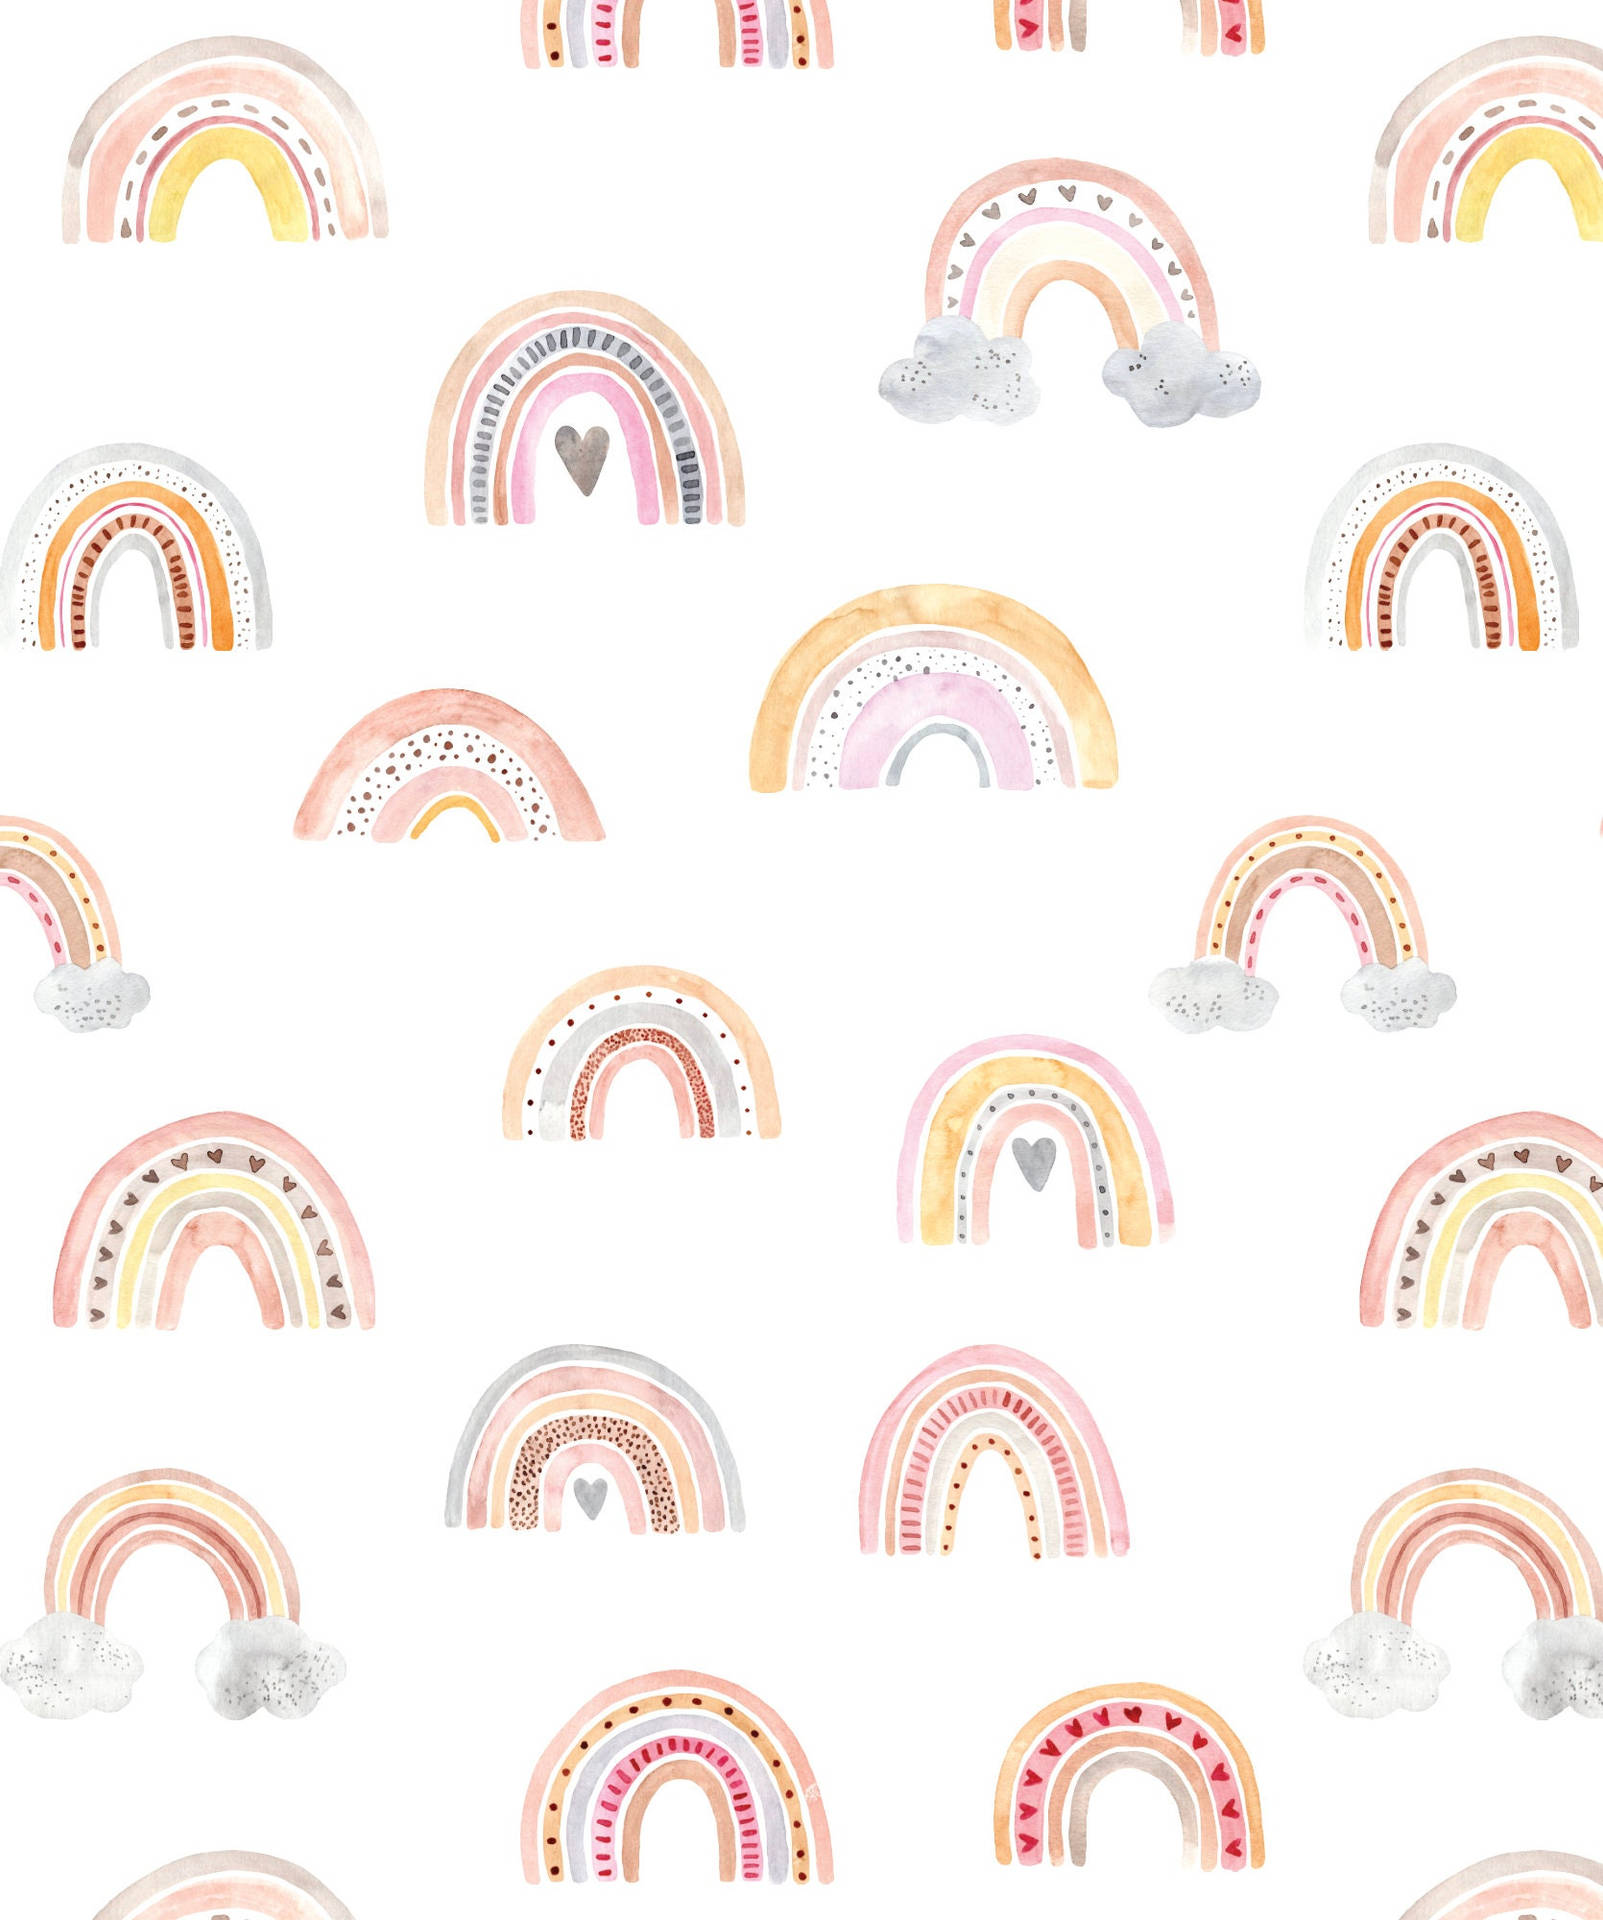 "Celebrate your individuality with a colourful Boho Rainbow" Wallpaper